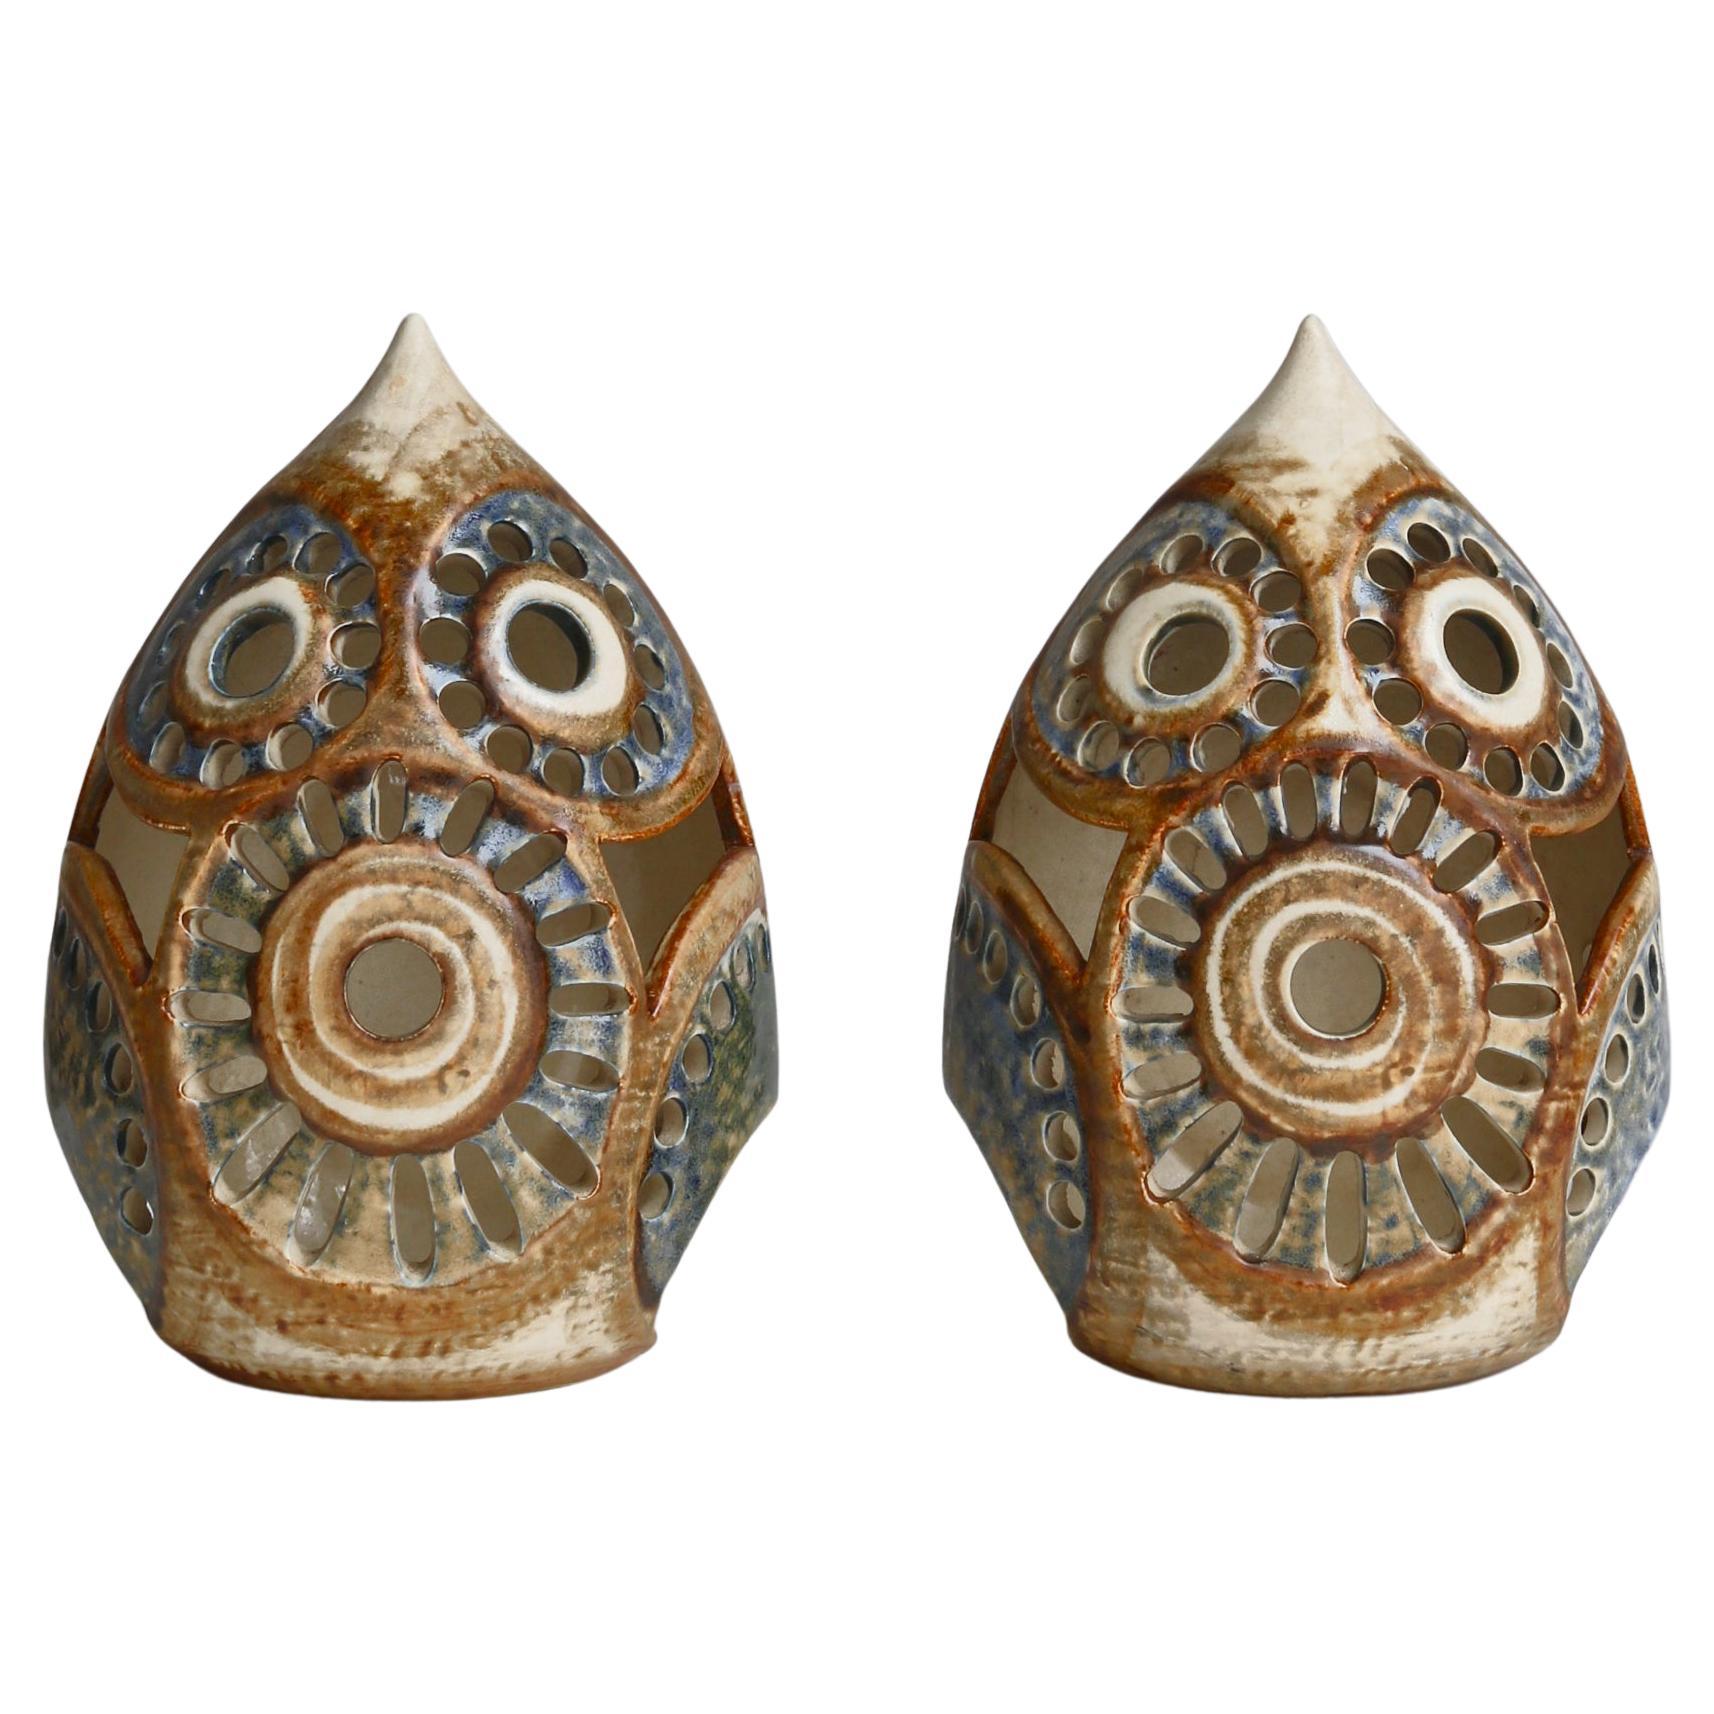 Set of Decorative Stoneware "Owl" Candle Lamps made at Søholm, Denmark, 1960s